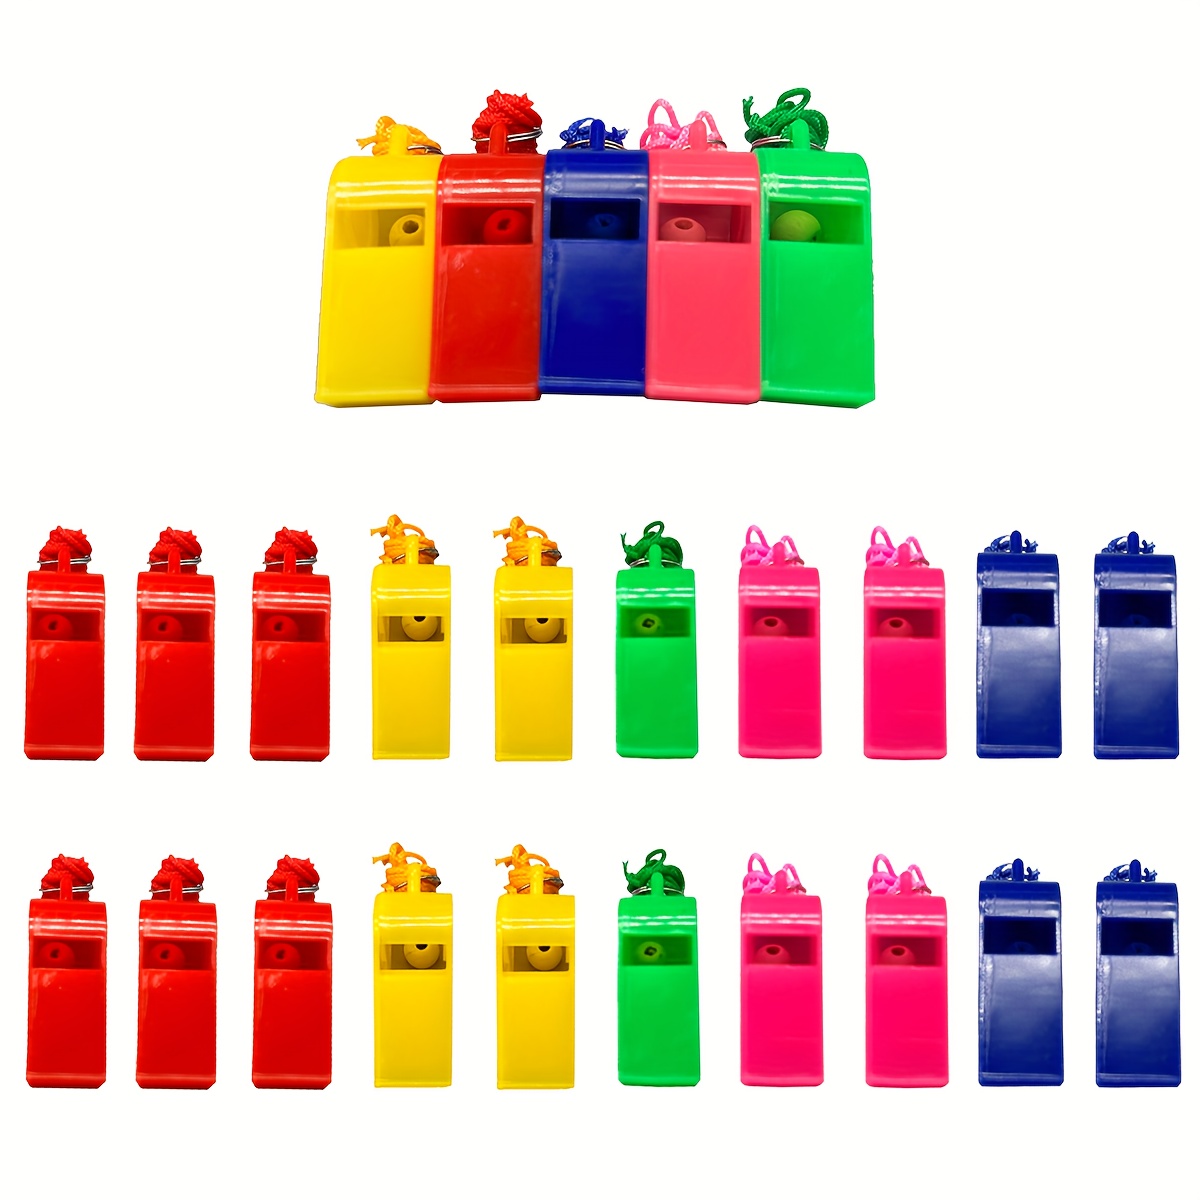 

24pcs Multicolor Plastic Sports Whistles With Lanyards, Loud And Crisp Whistles Perfect For Coaches, Referees And Officials